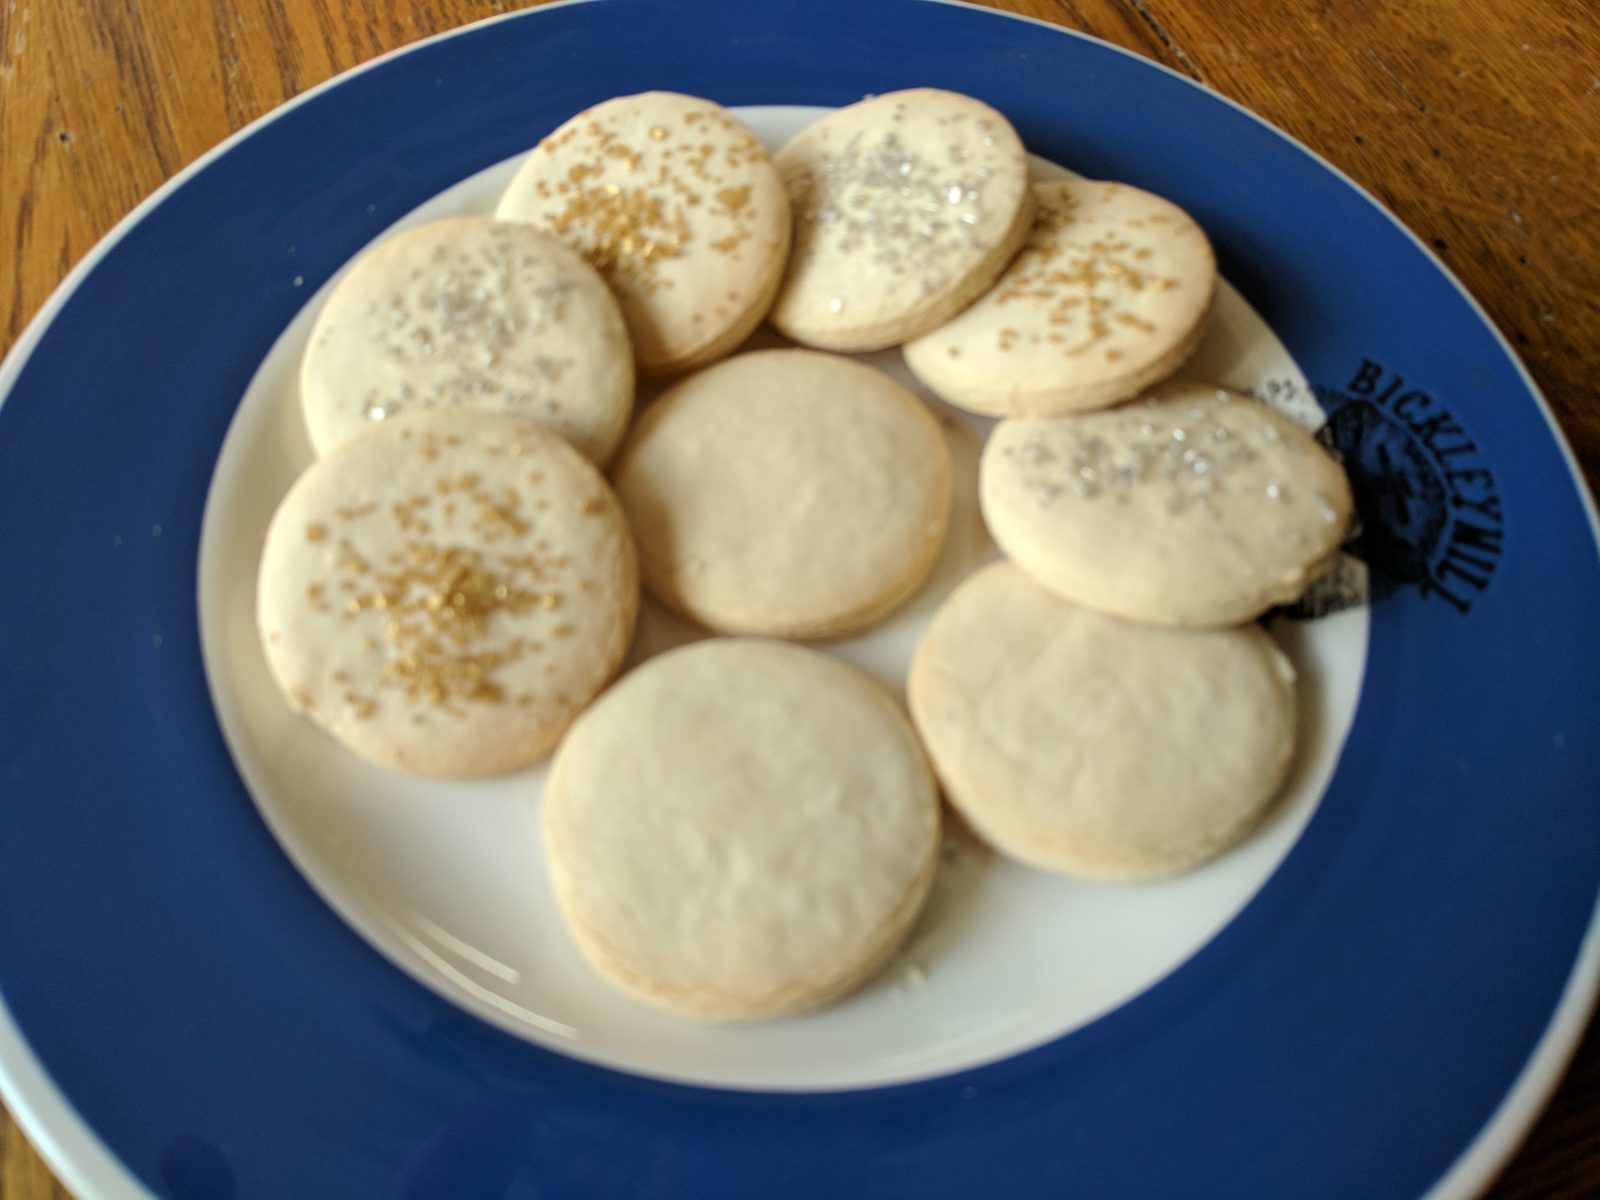 New Year's Cookies